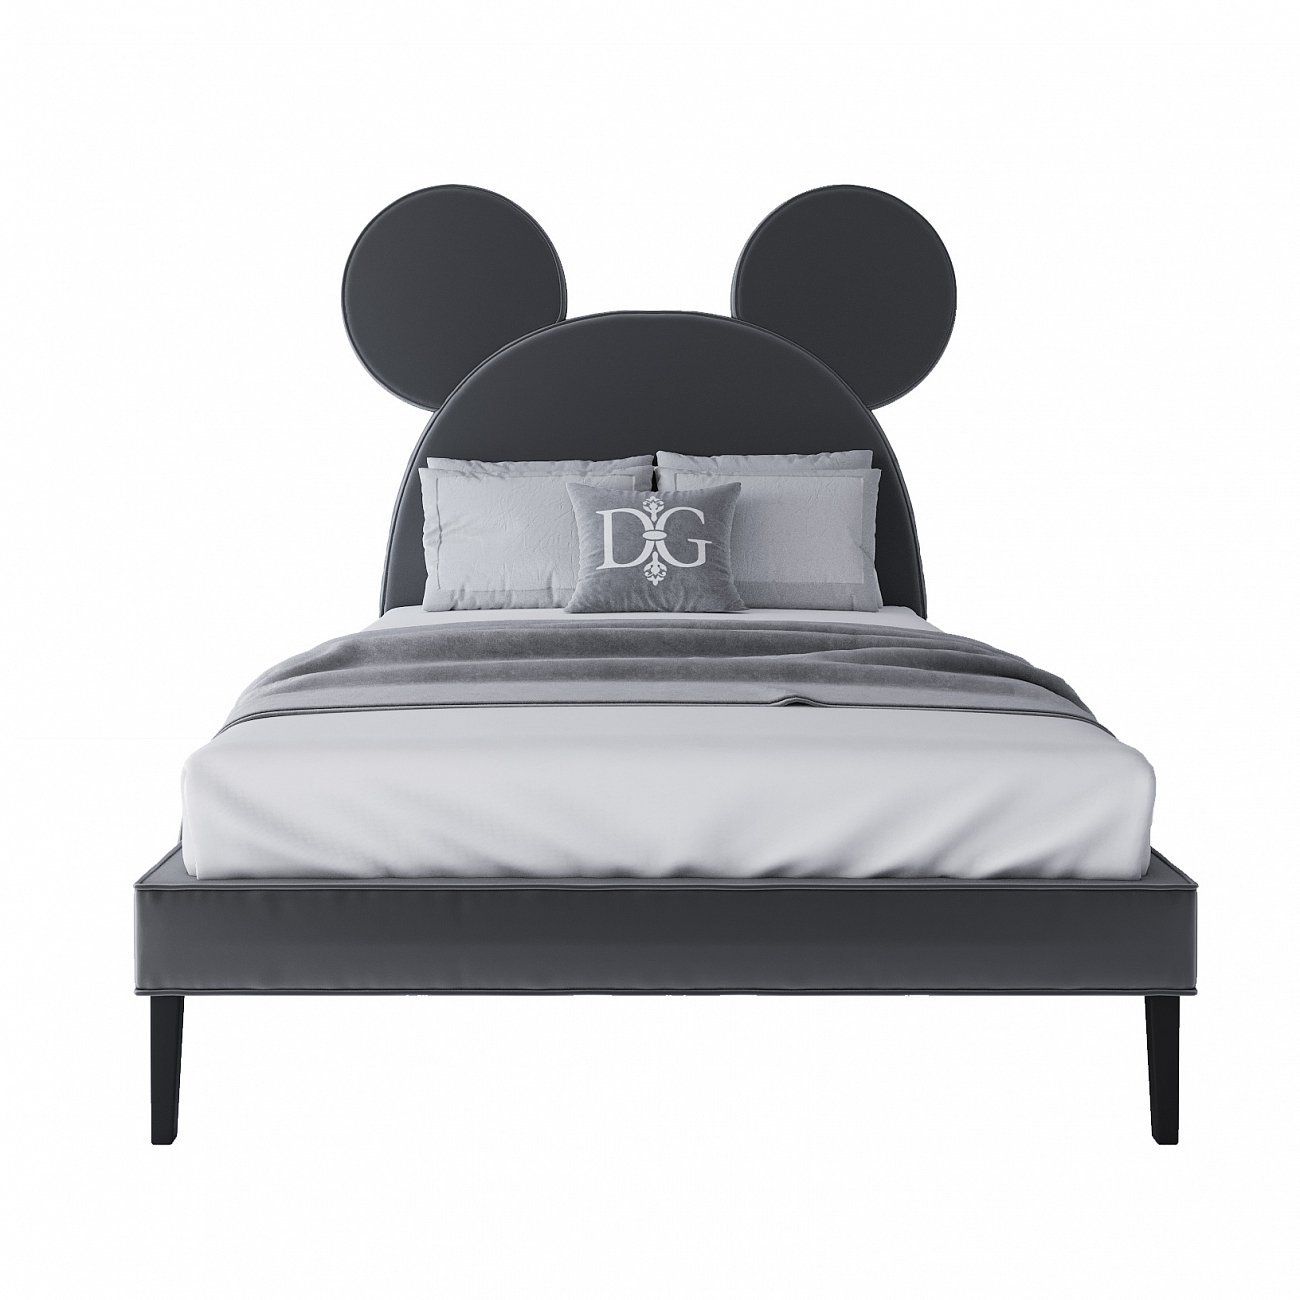 Double bed 160x200 cm black Mickey Mouse